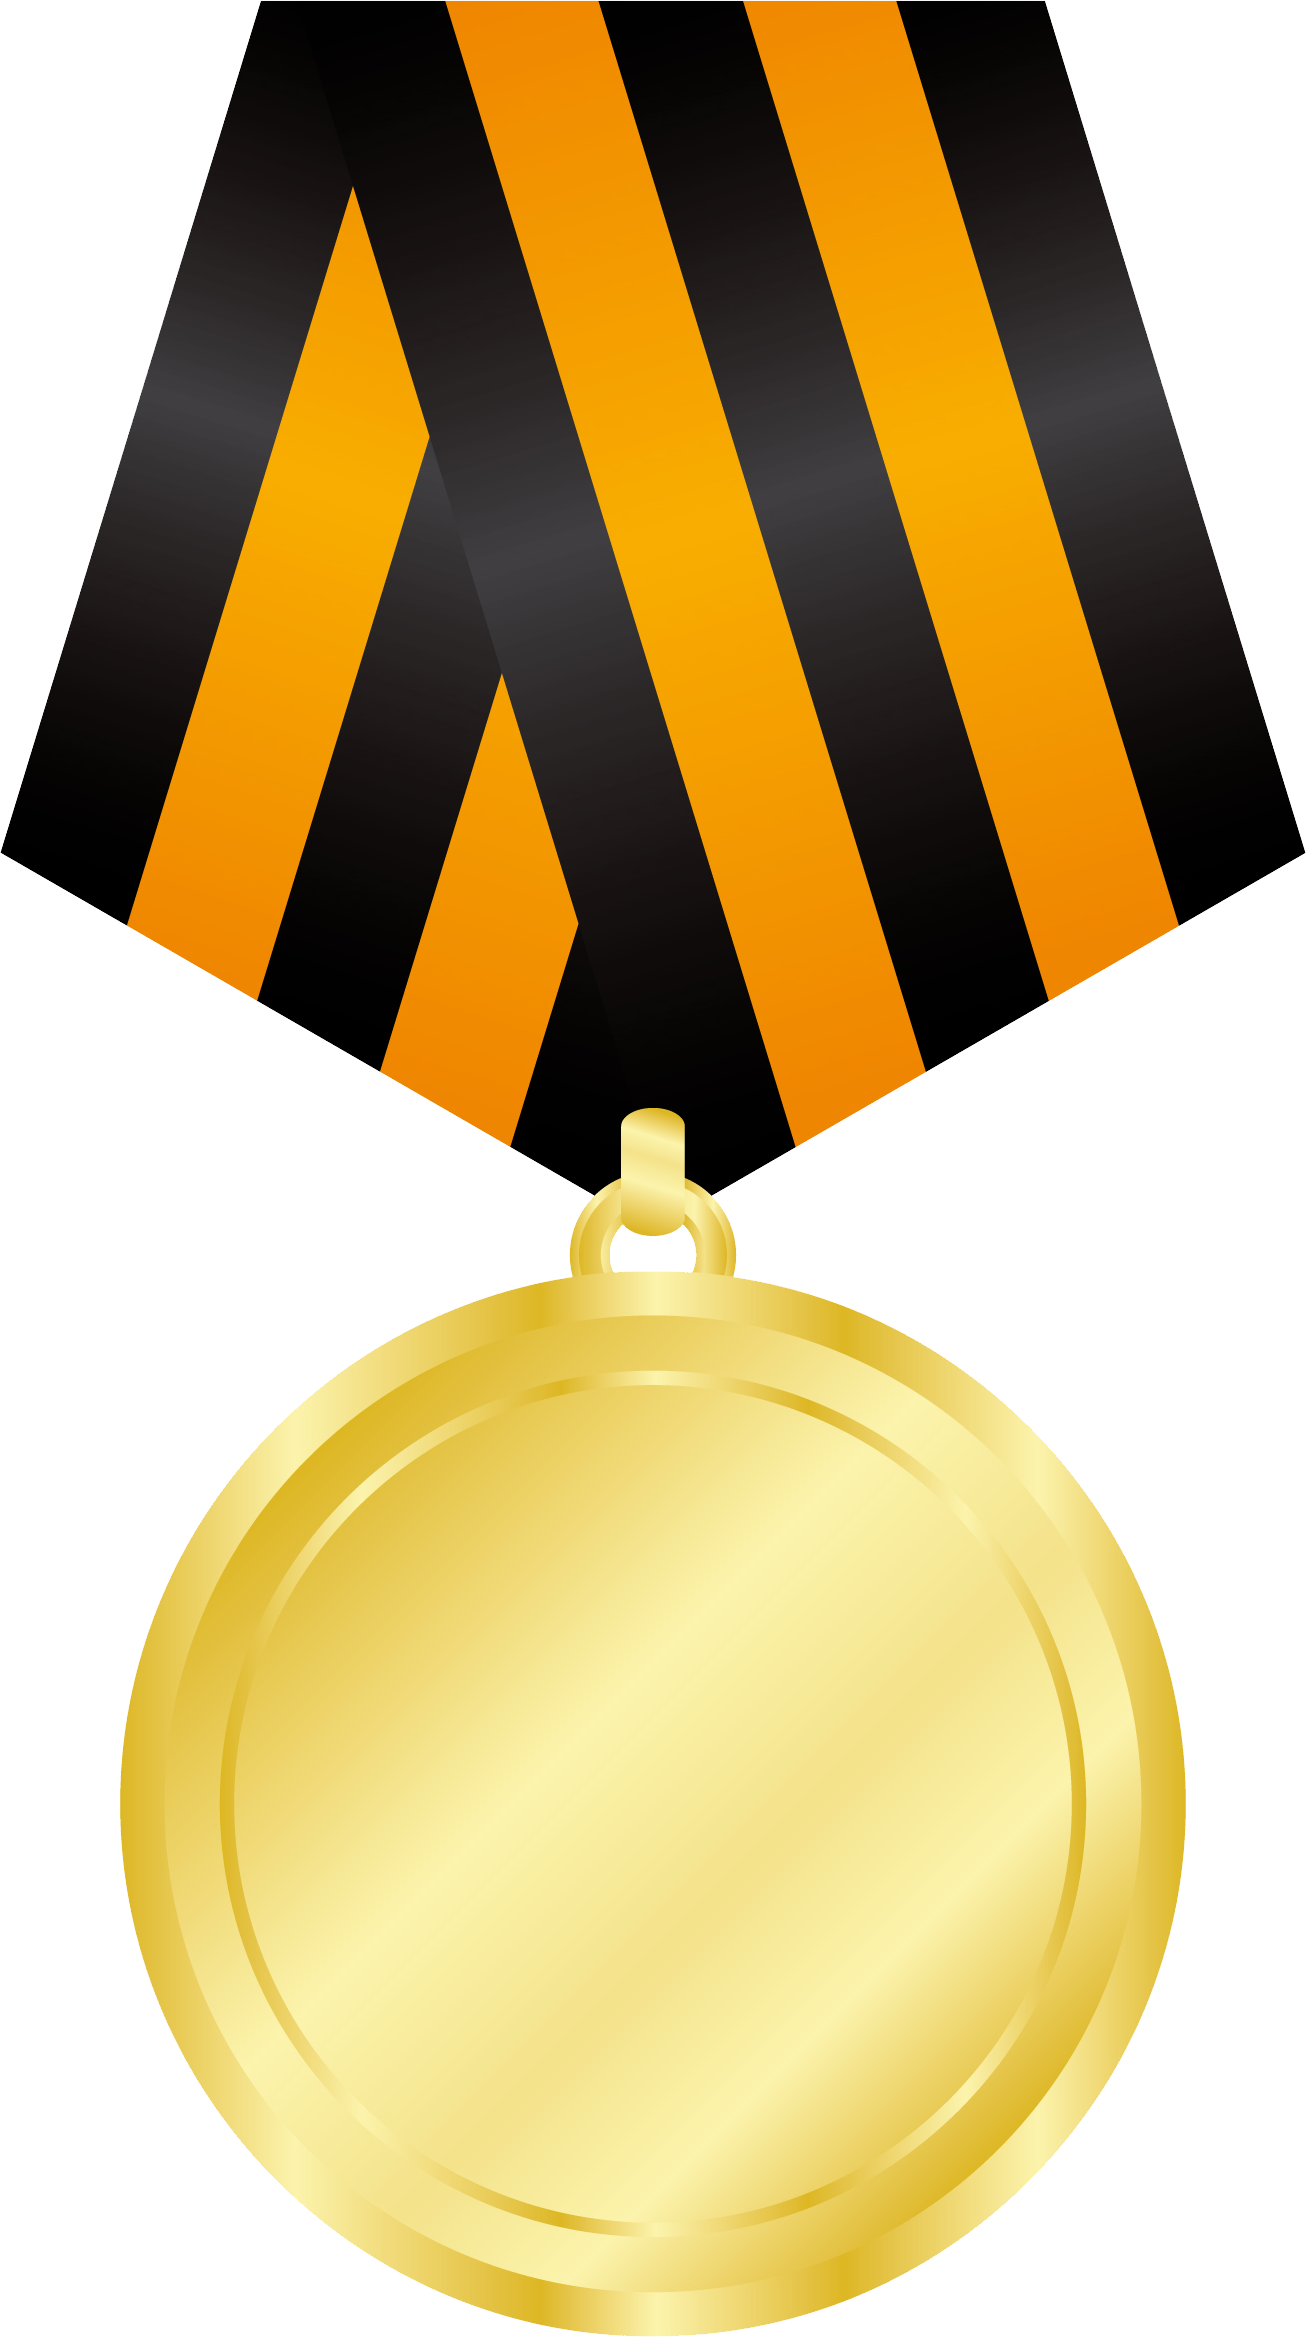 Medal PNG HD Images